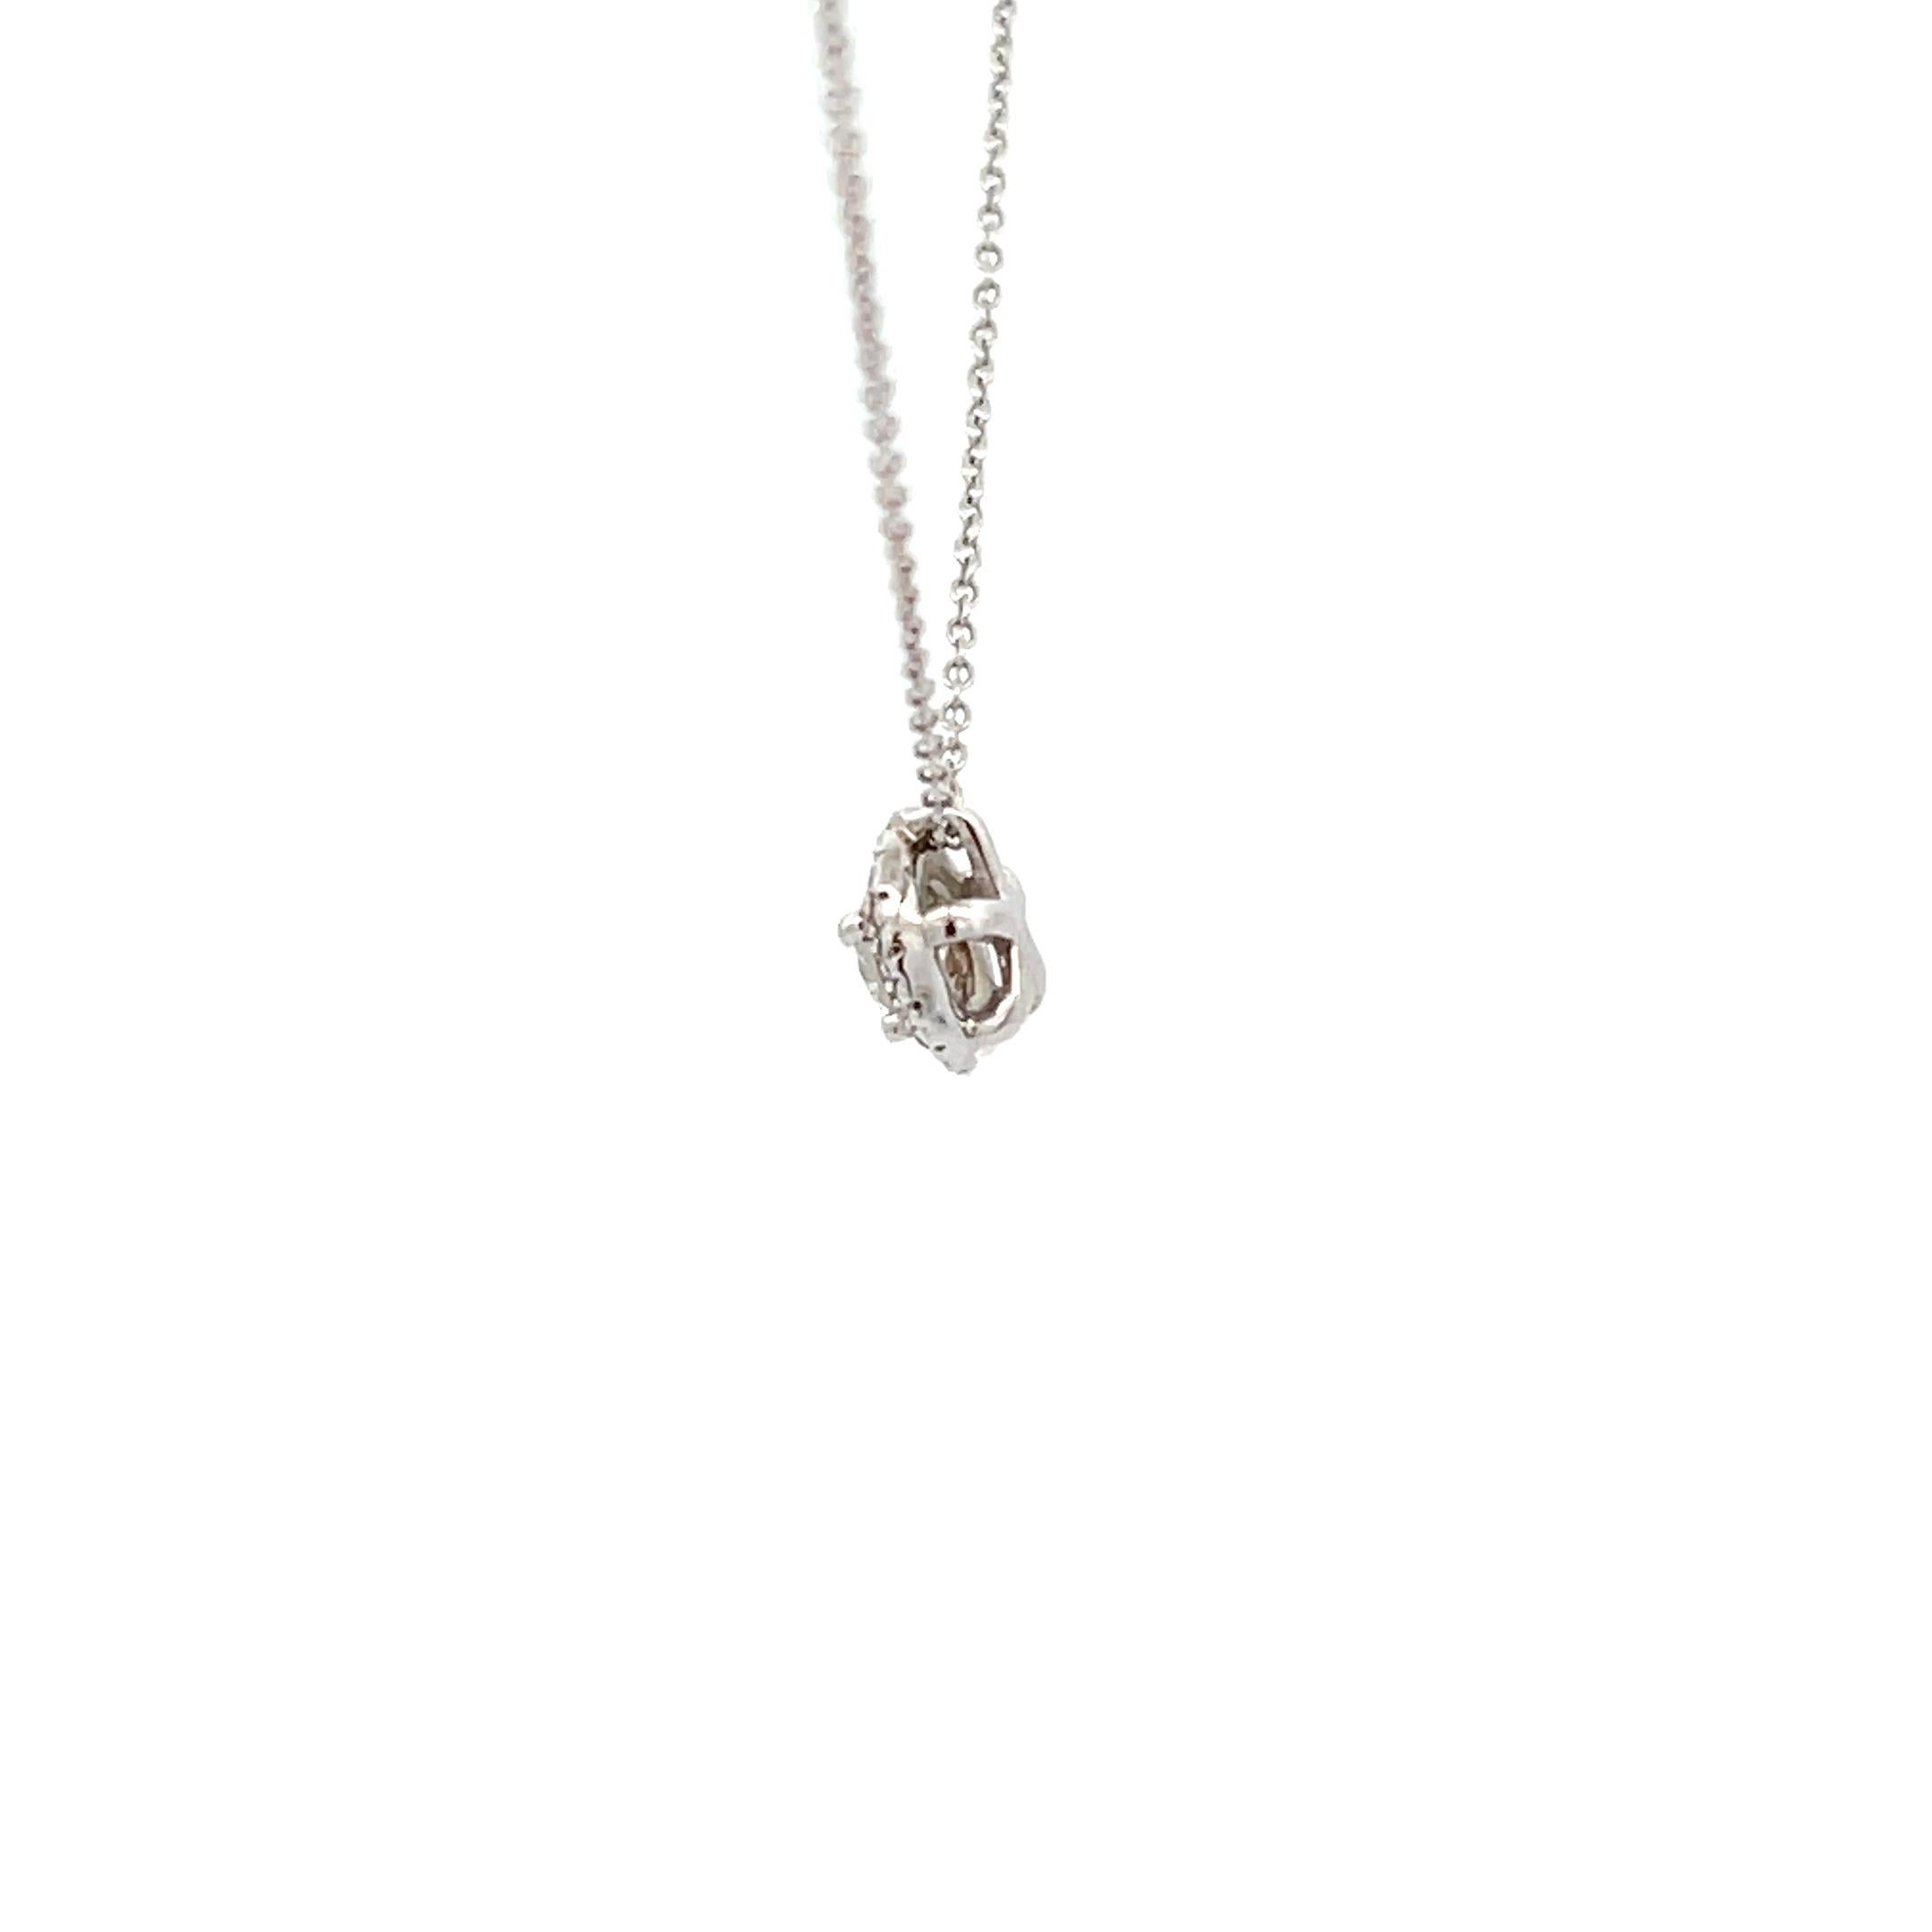 Introducing our exquisite 14K White Gold 0.30ctw Diamond Framed Pendant, a captivating piece that effortlessly blends sophistication with timeless beauty. Crafted with meticulous attention to detail, this pendant is sure to become an alluring